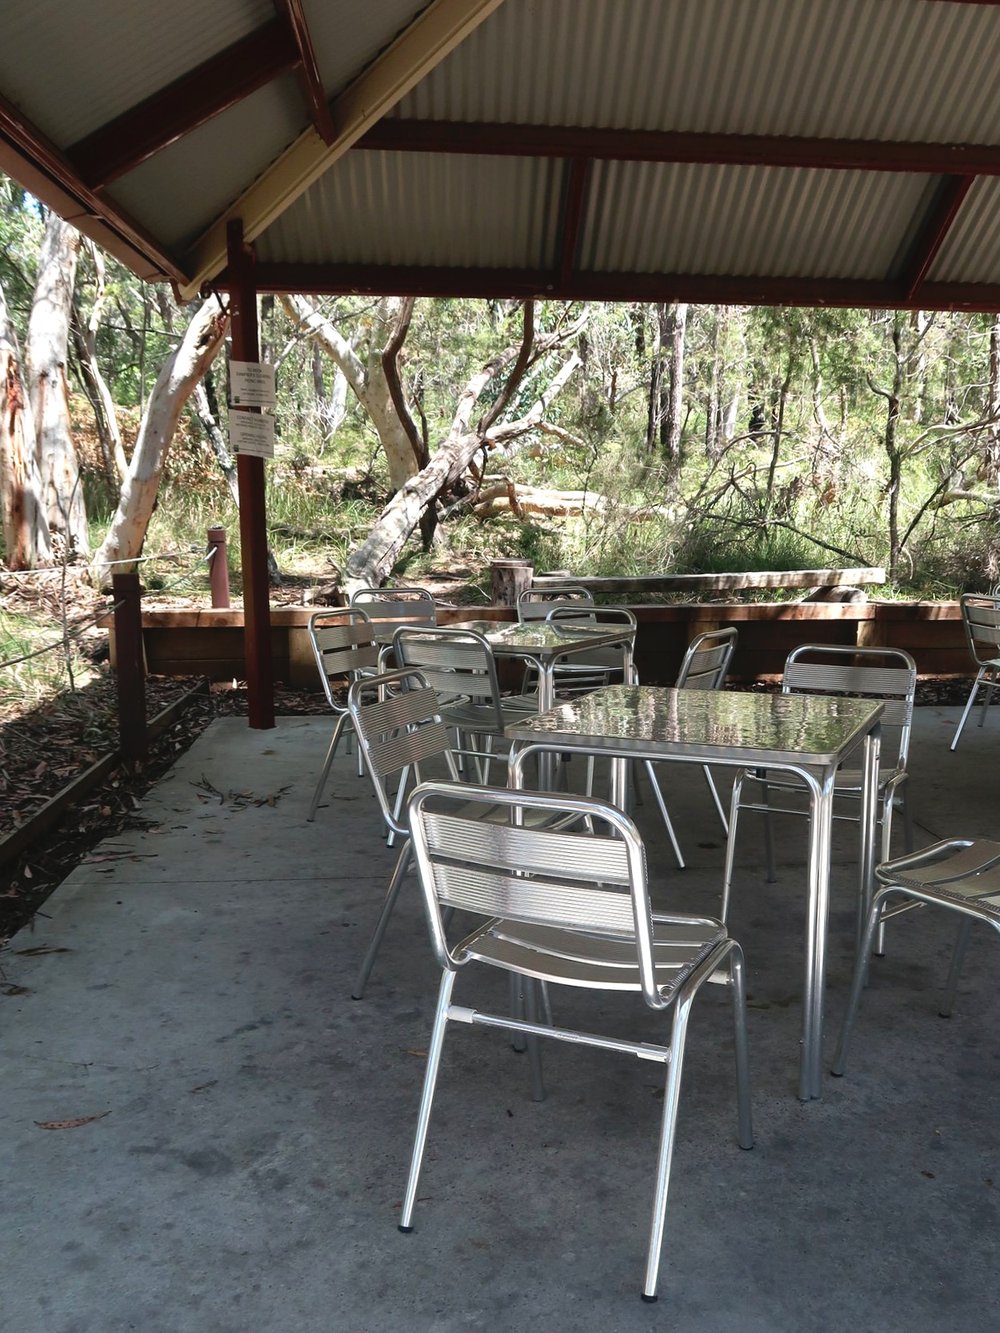 Picnic Shelter at Dampier's Clearing